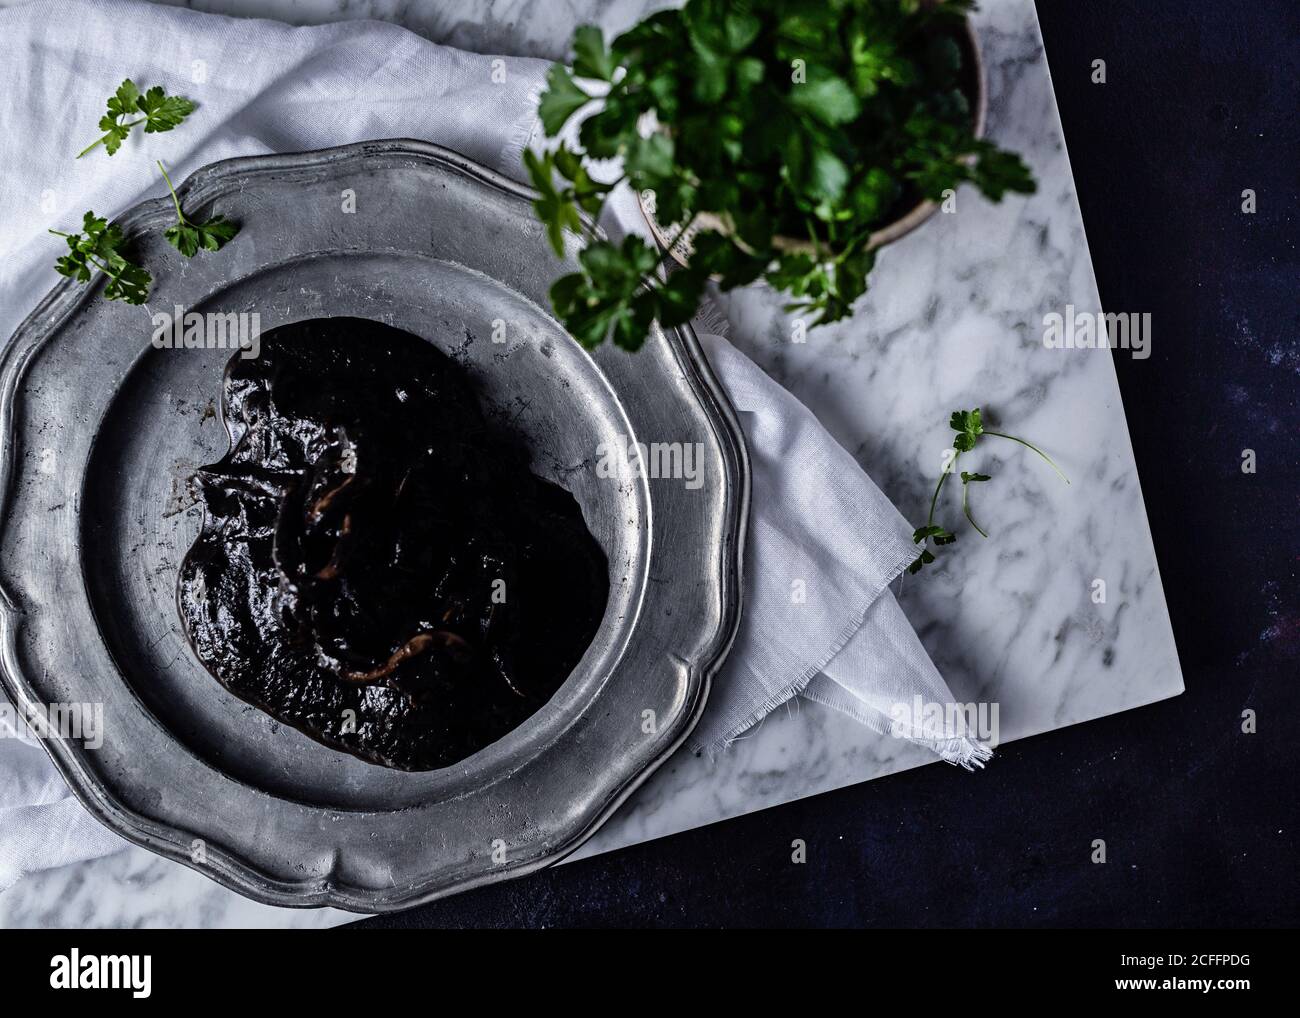 Top view of metal plate with plum jelly placed on white fabric on table together with bunch of parsley Stock Photo